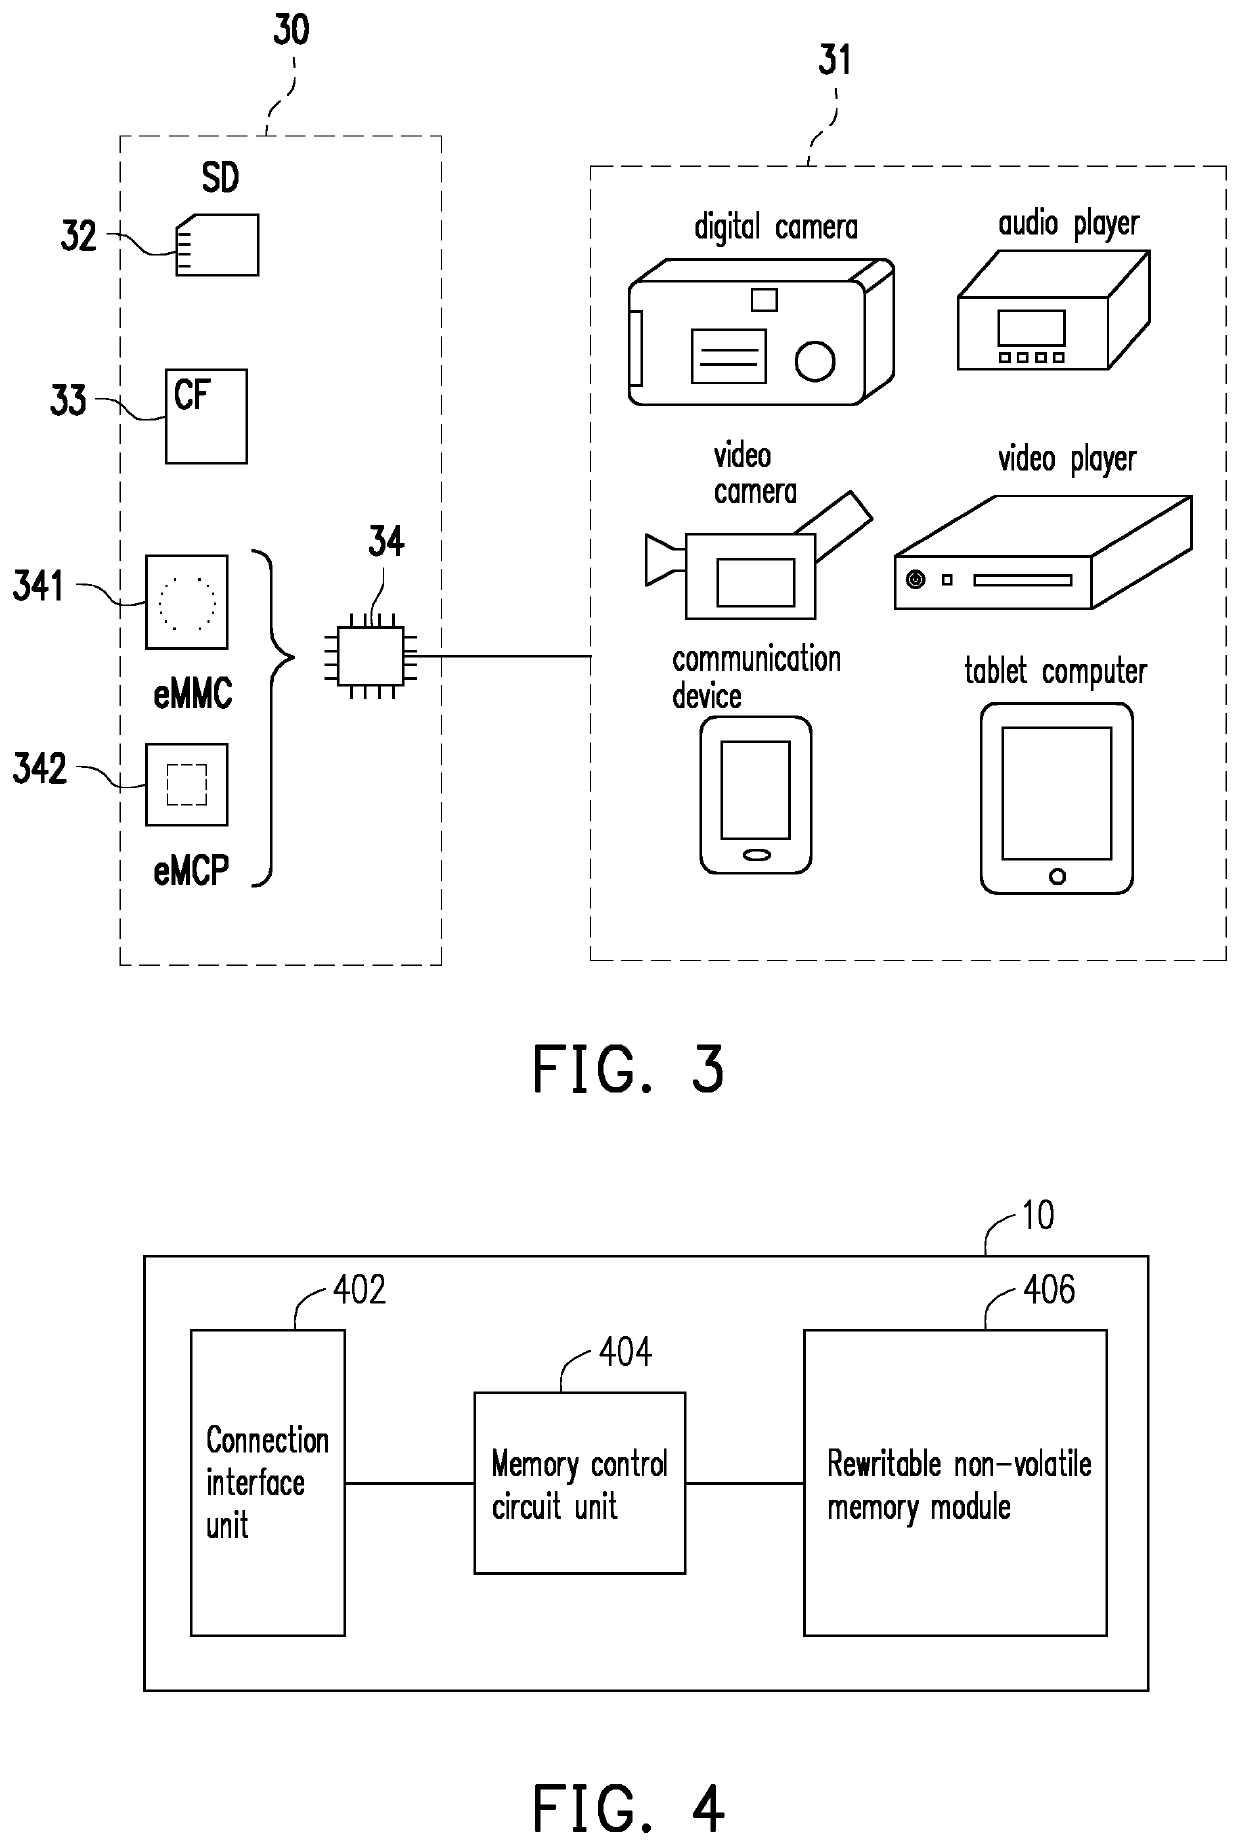 Data writing method using different programming modes based on the number of available physical erasing units, memory control circuit unit and memory storage device